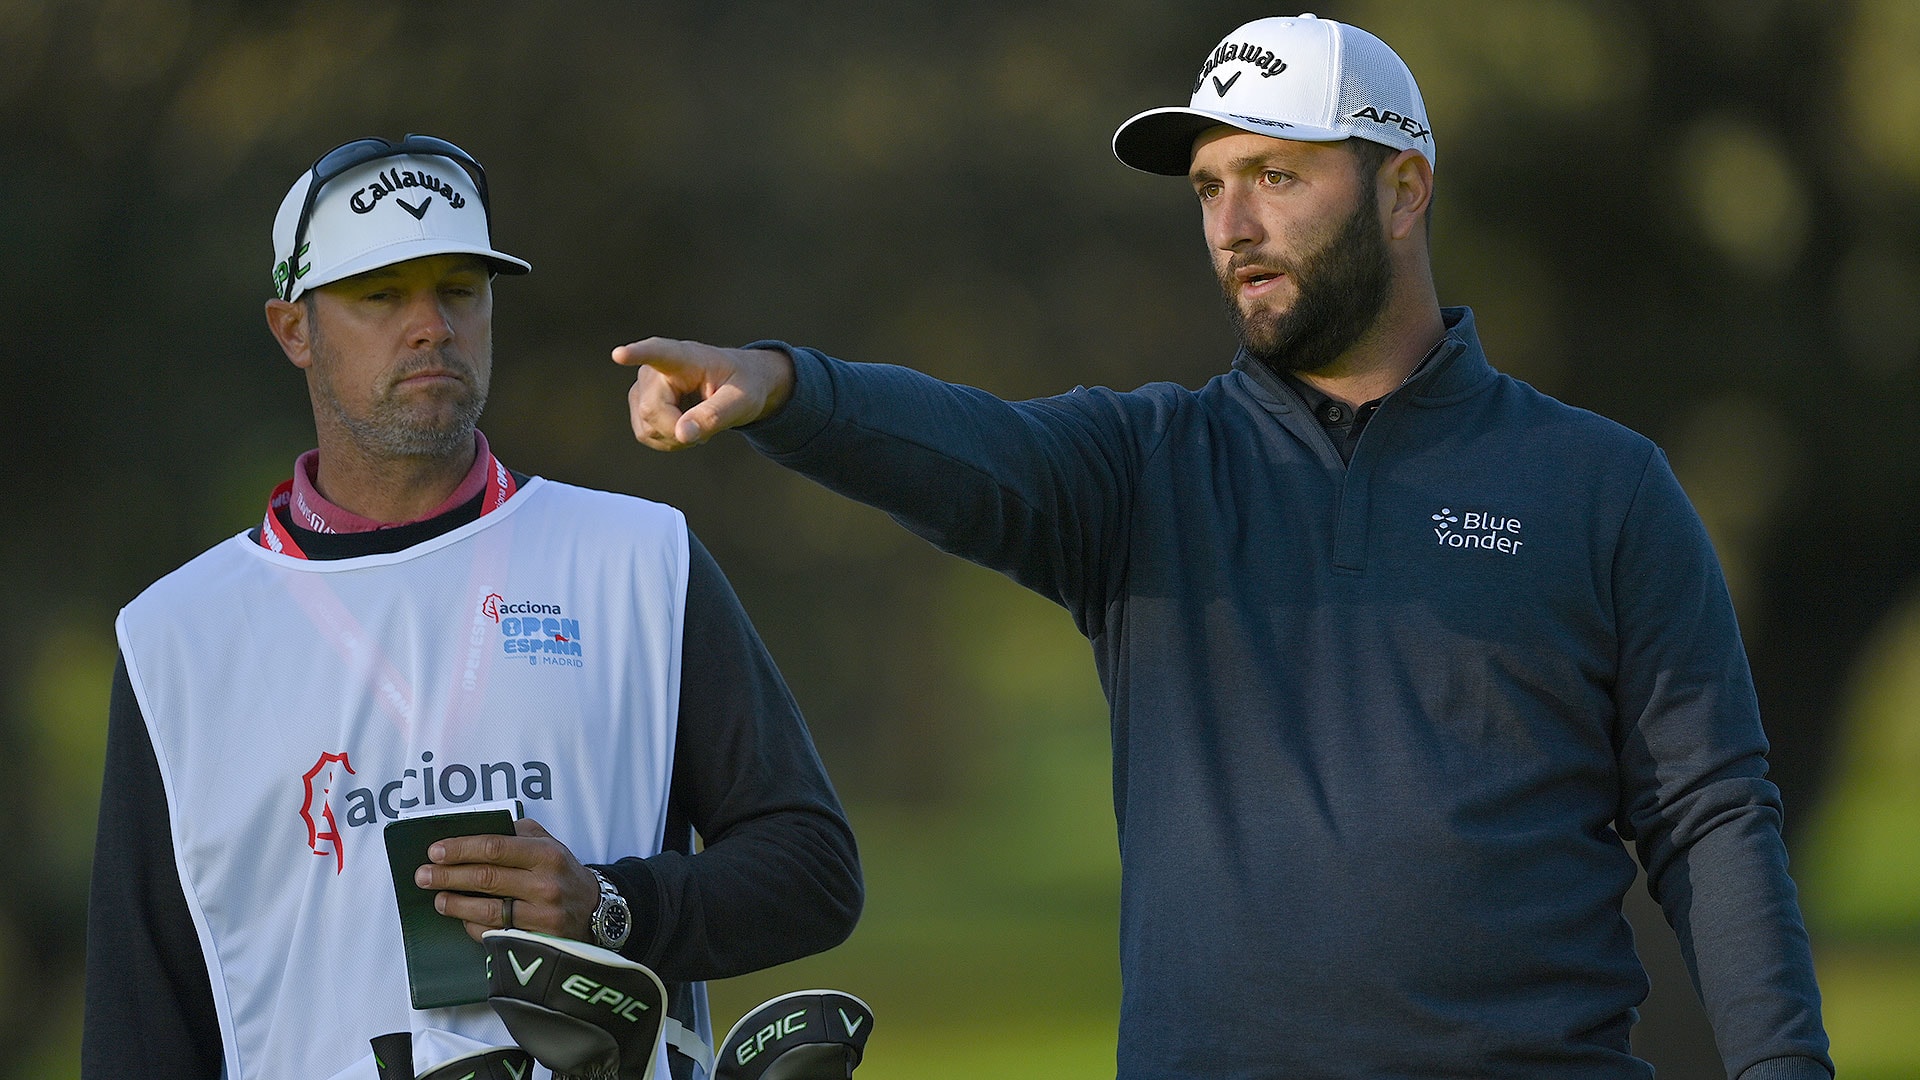 Jon Rahm sees firsthand how things have changed for him in Spain